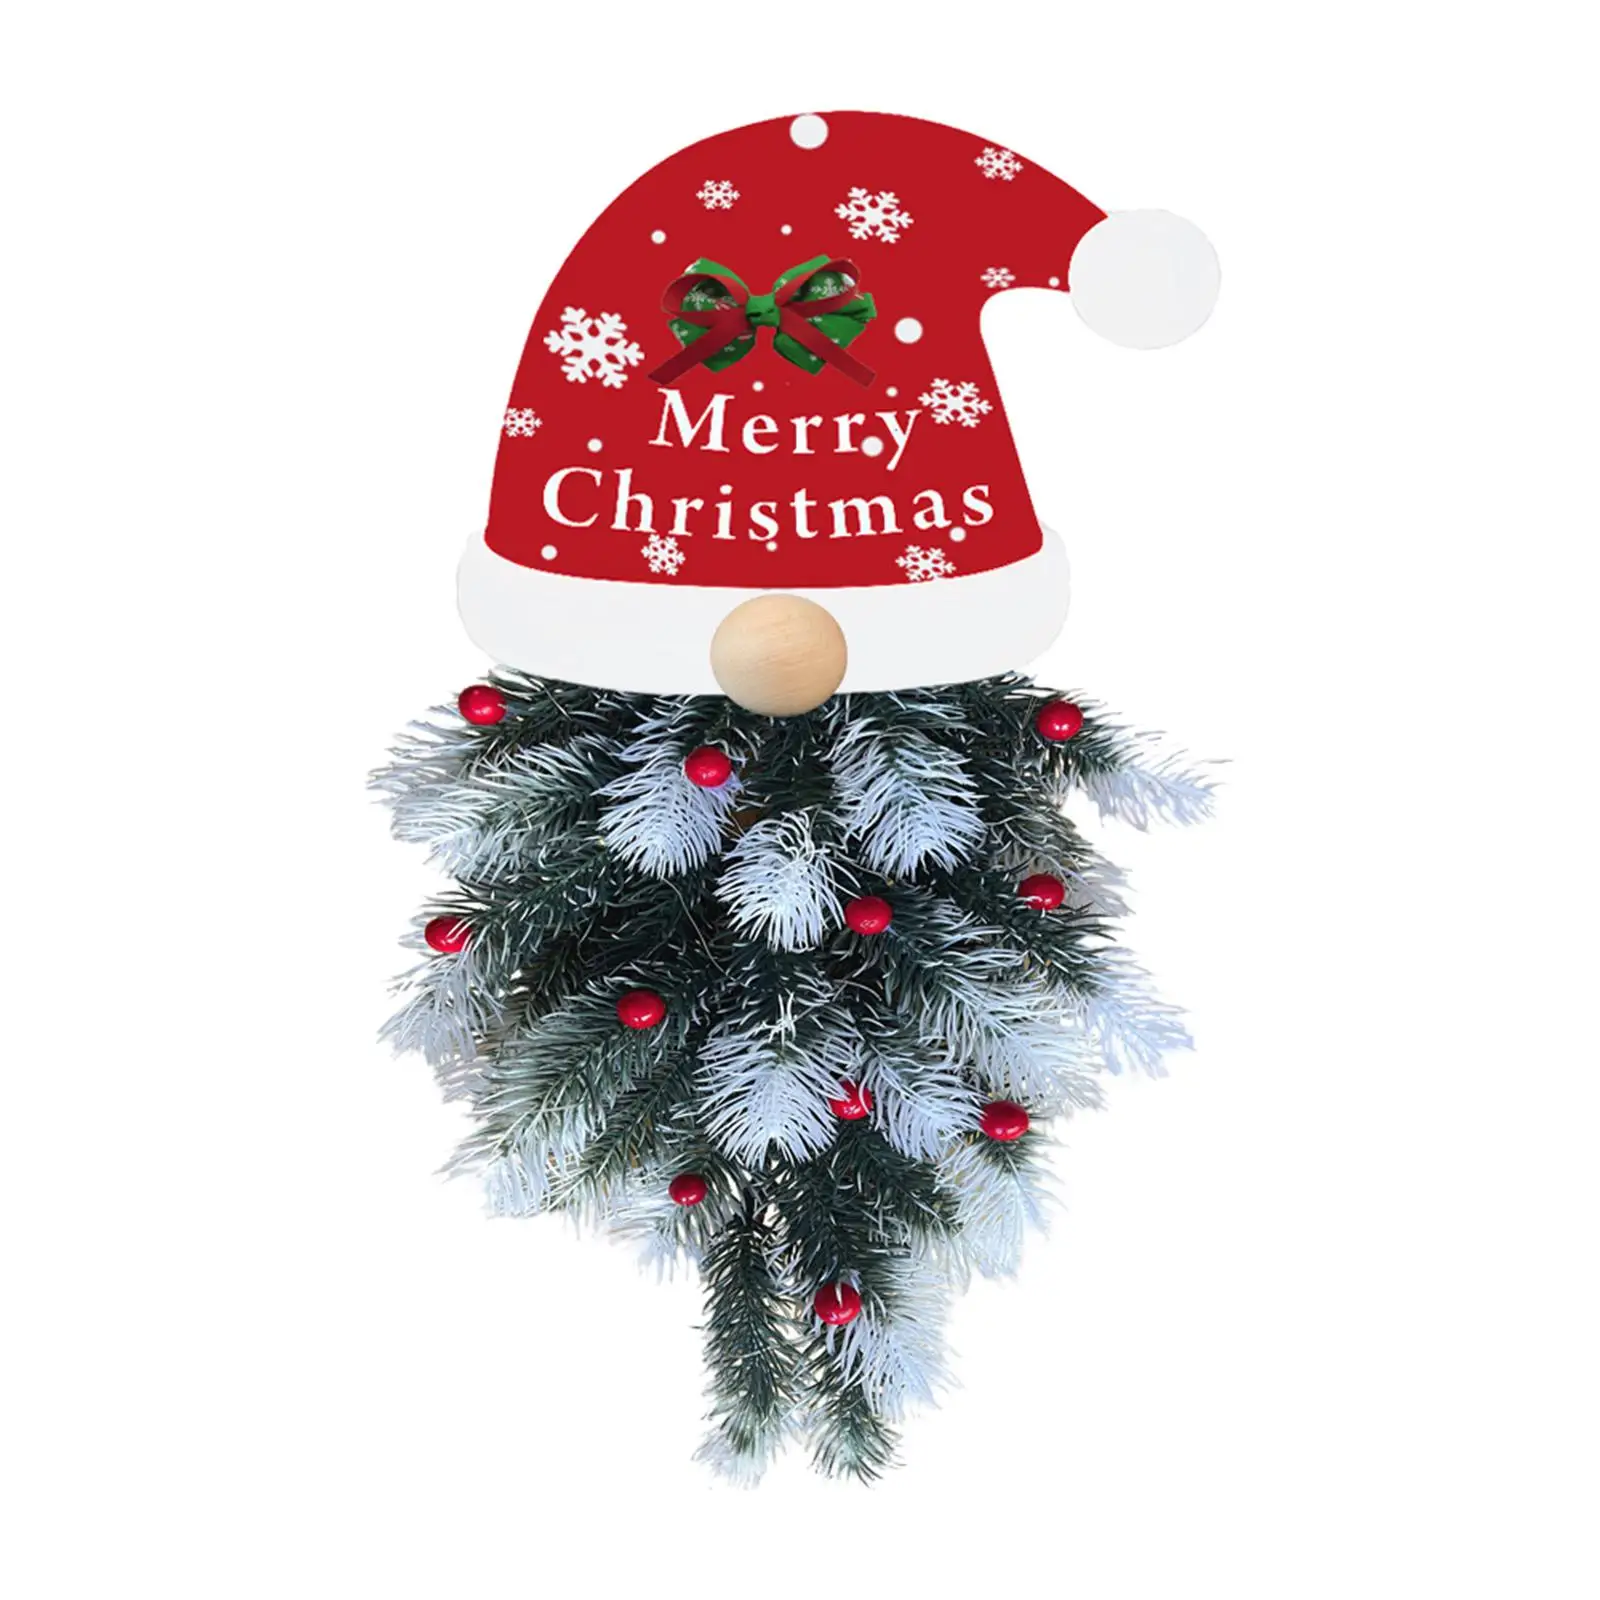 Artificial Christmas Swag with Lights Christmas Garland Swag for Outside